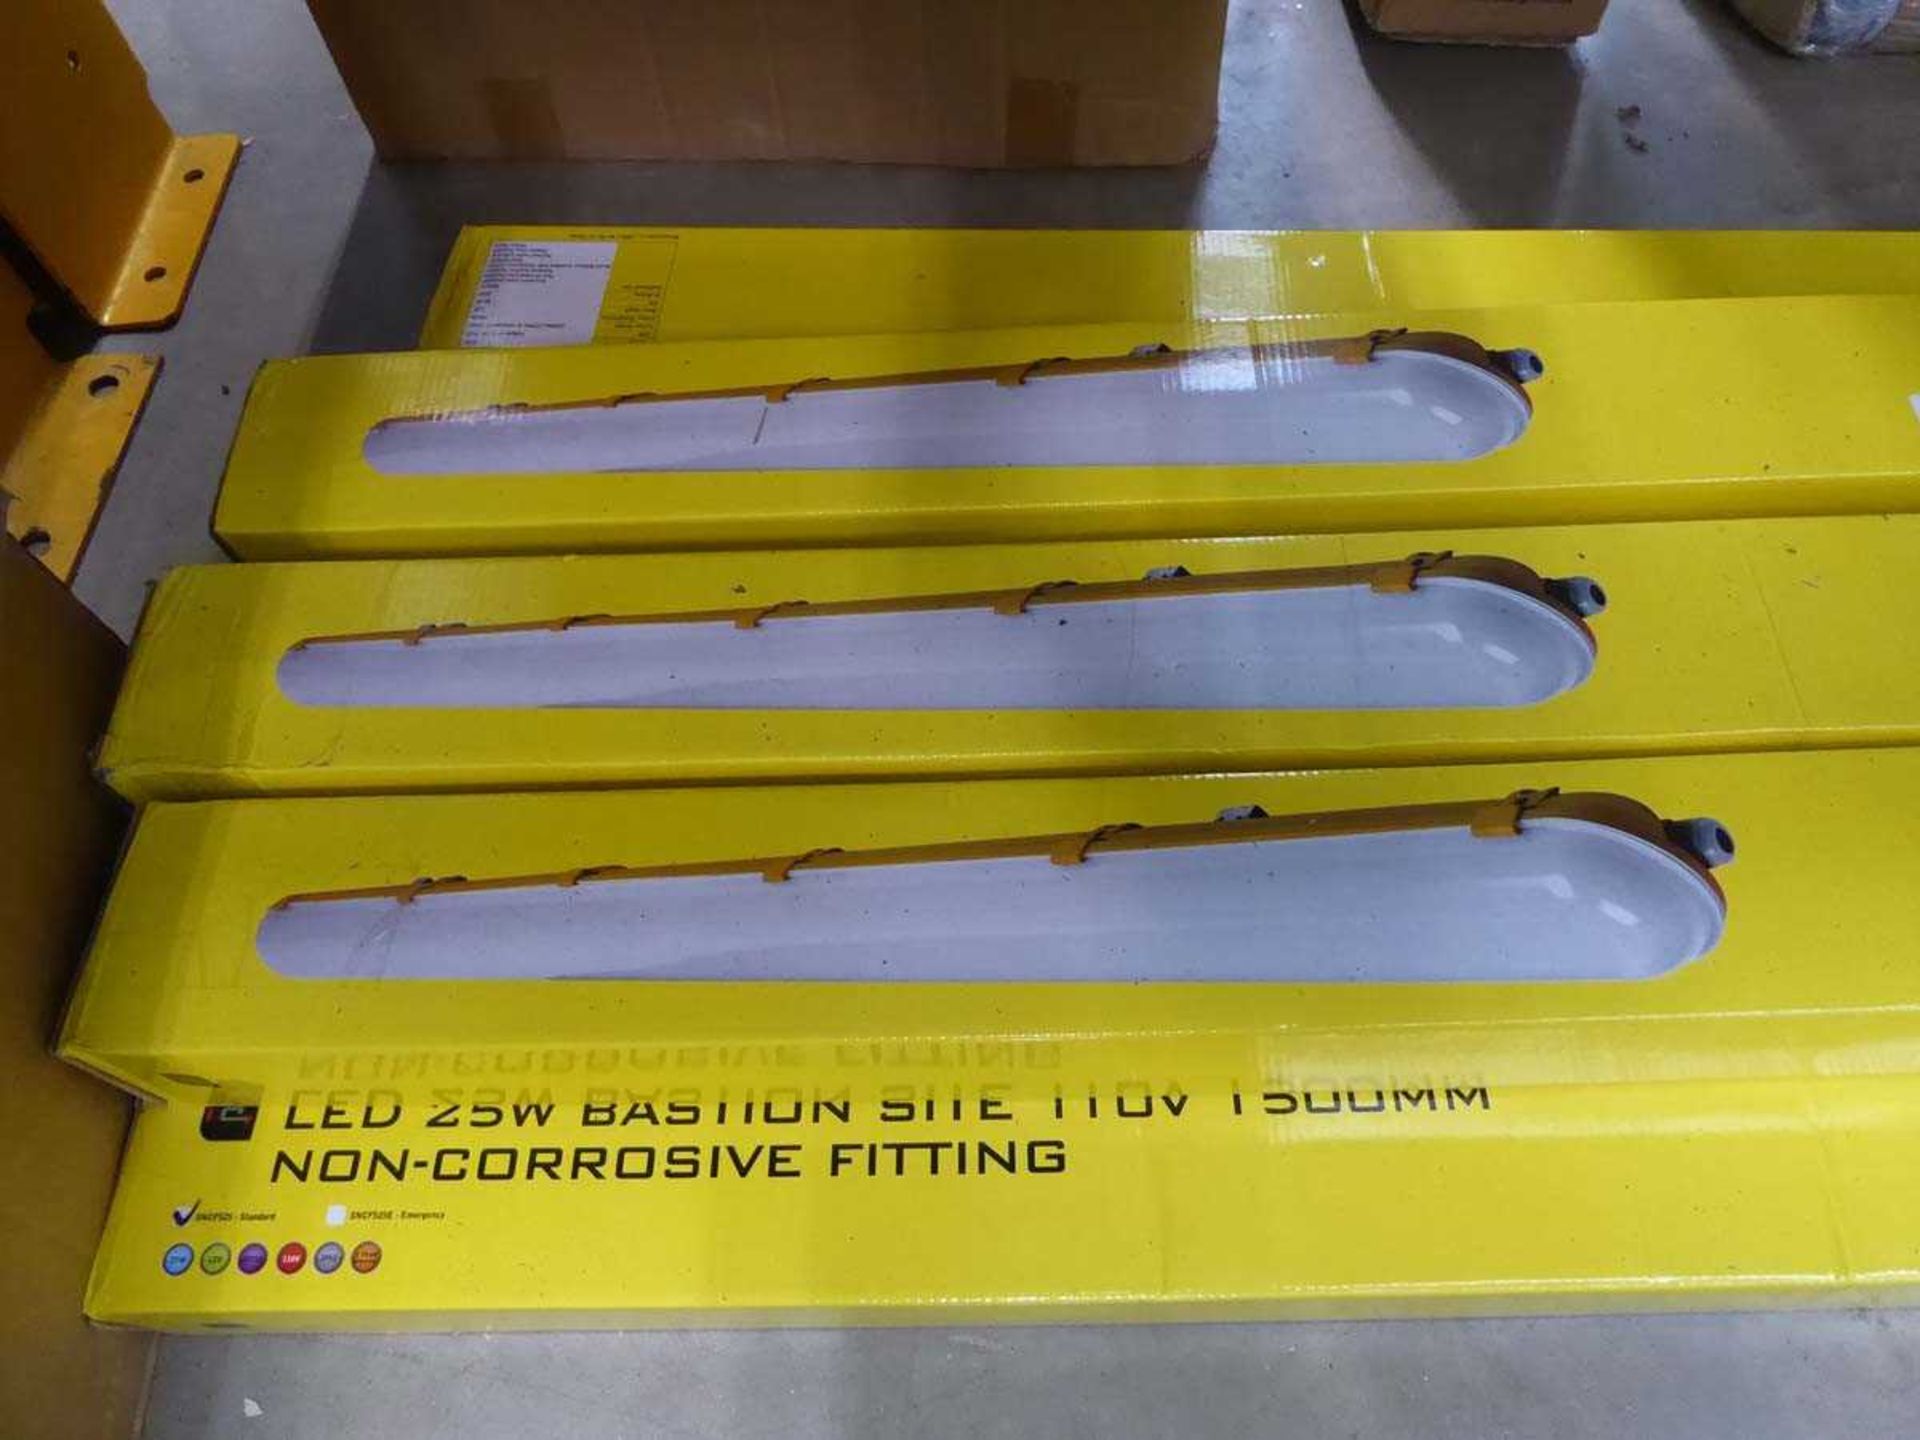 Quantity of LED 25W Bastion Site 110V non-corrosive fitting lights - Image 2 of 2